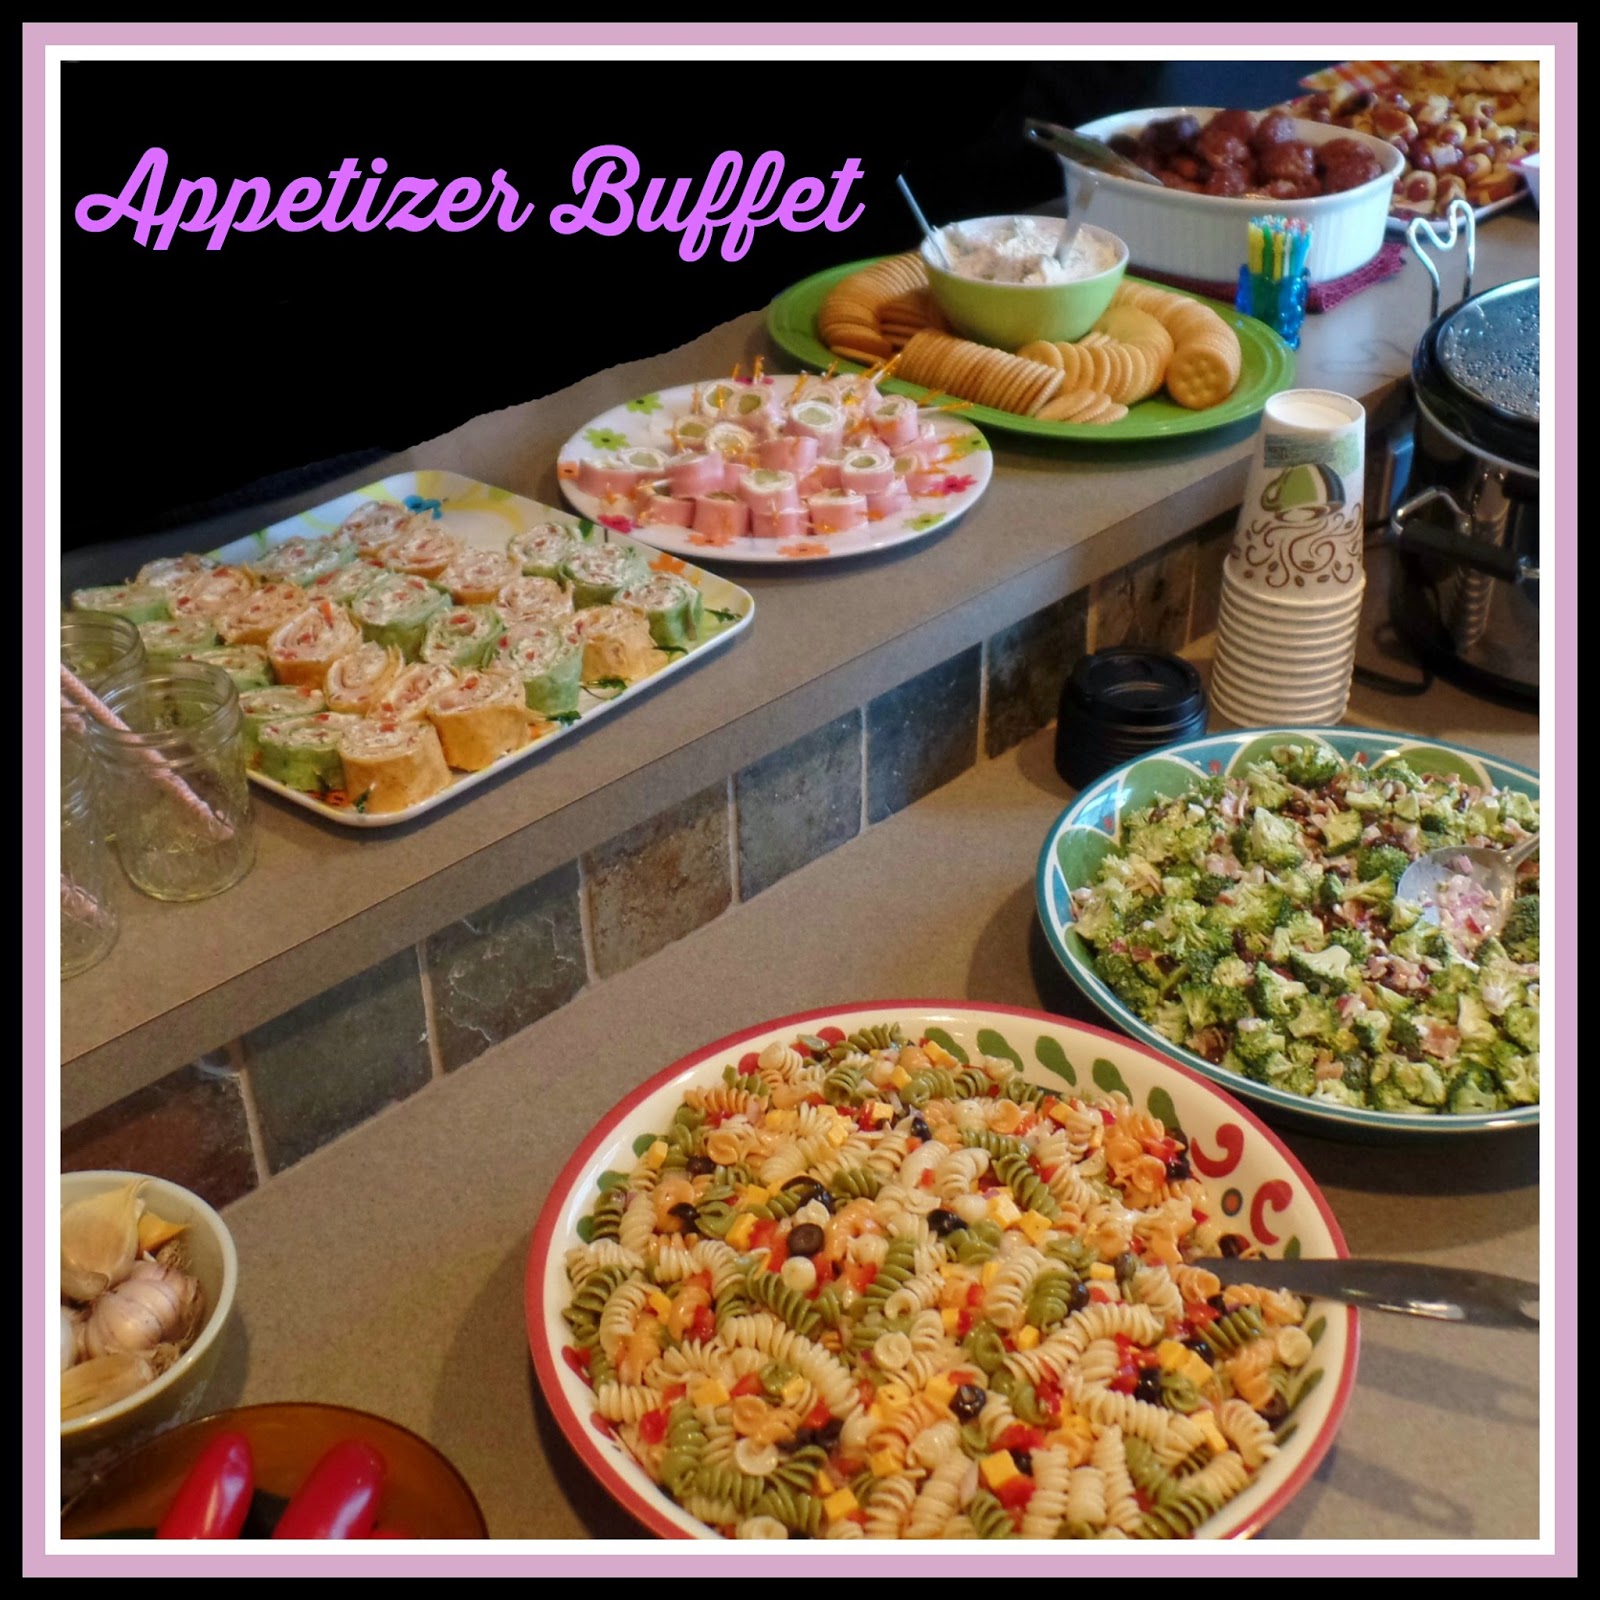 April's Homemaking: My Sister's Baby Shower- Appetizer Buffet, Desserts,  Games, and Favors